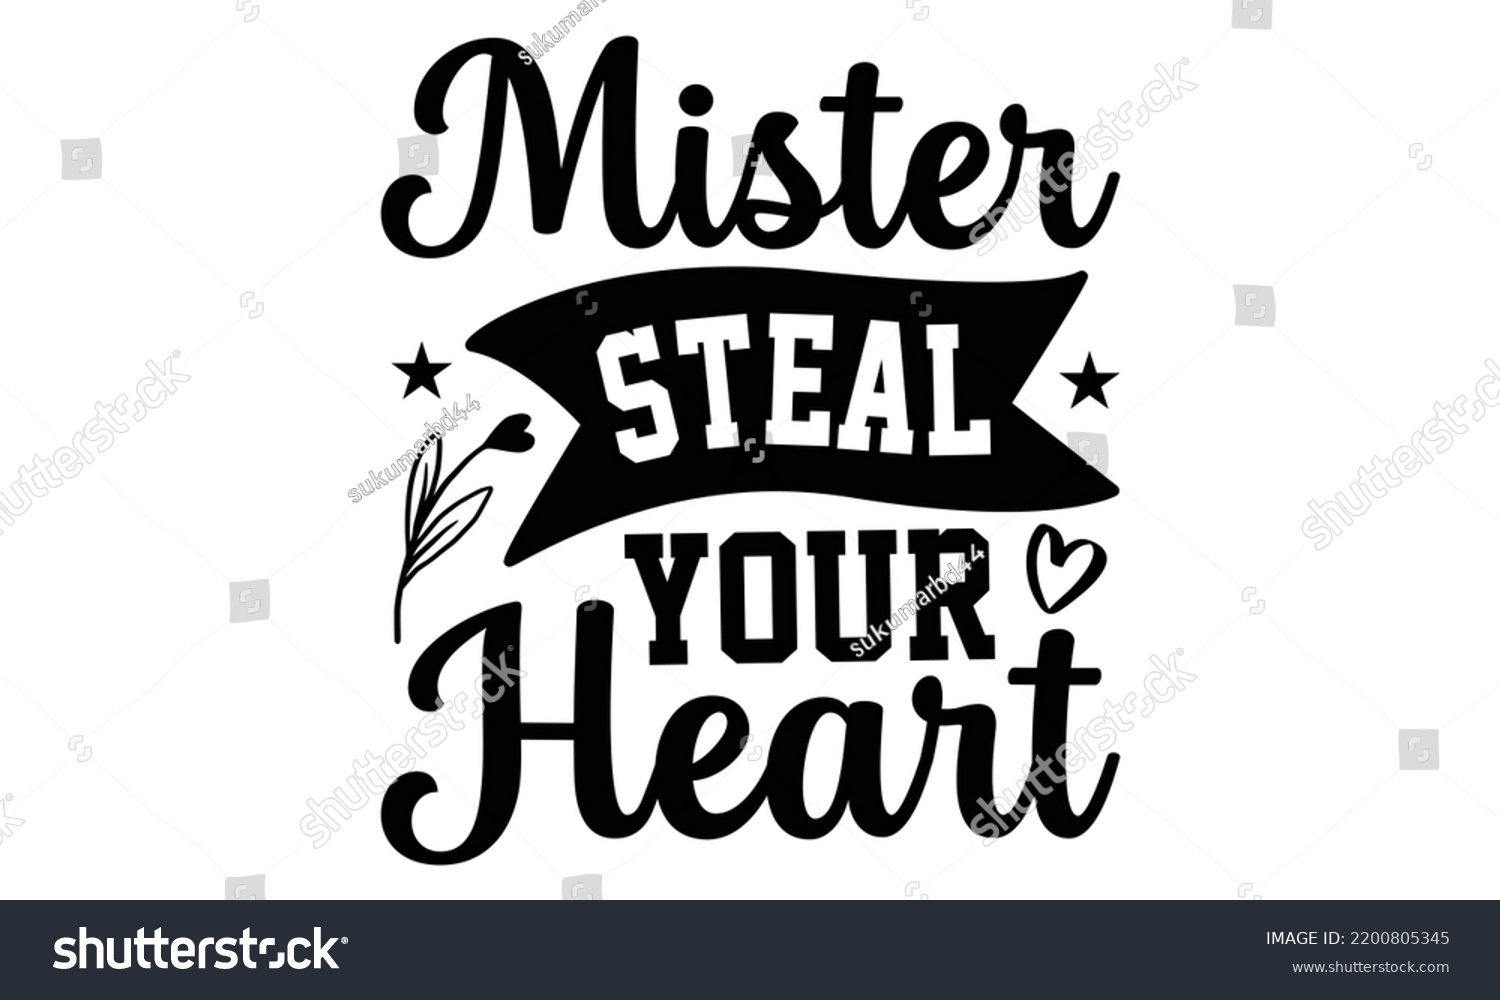 SVG of Mister Steal Your Heart - Valentine's Day t shirt design, Calligraphy graphic design, Hand written vector t shirt design, lettering phrase isolated on white background, svg Files for Cutting svg